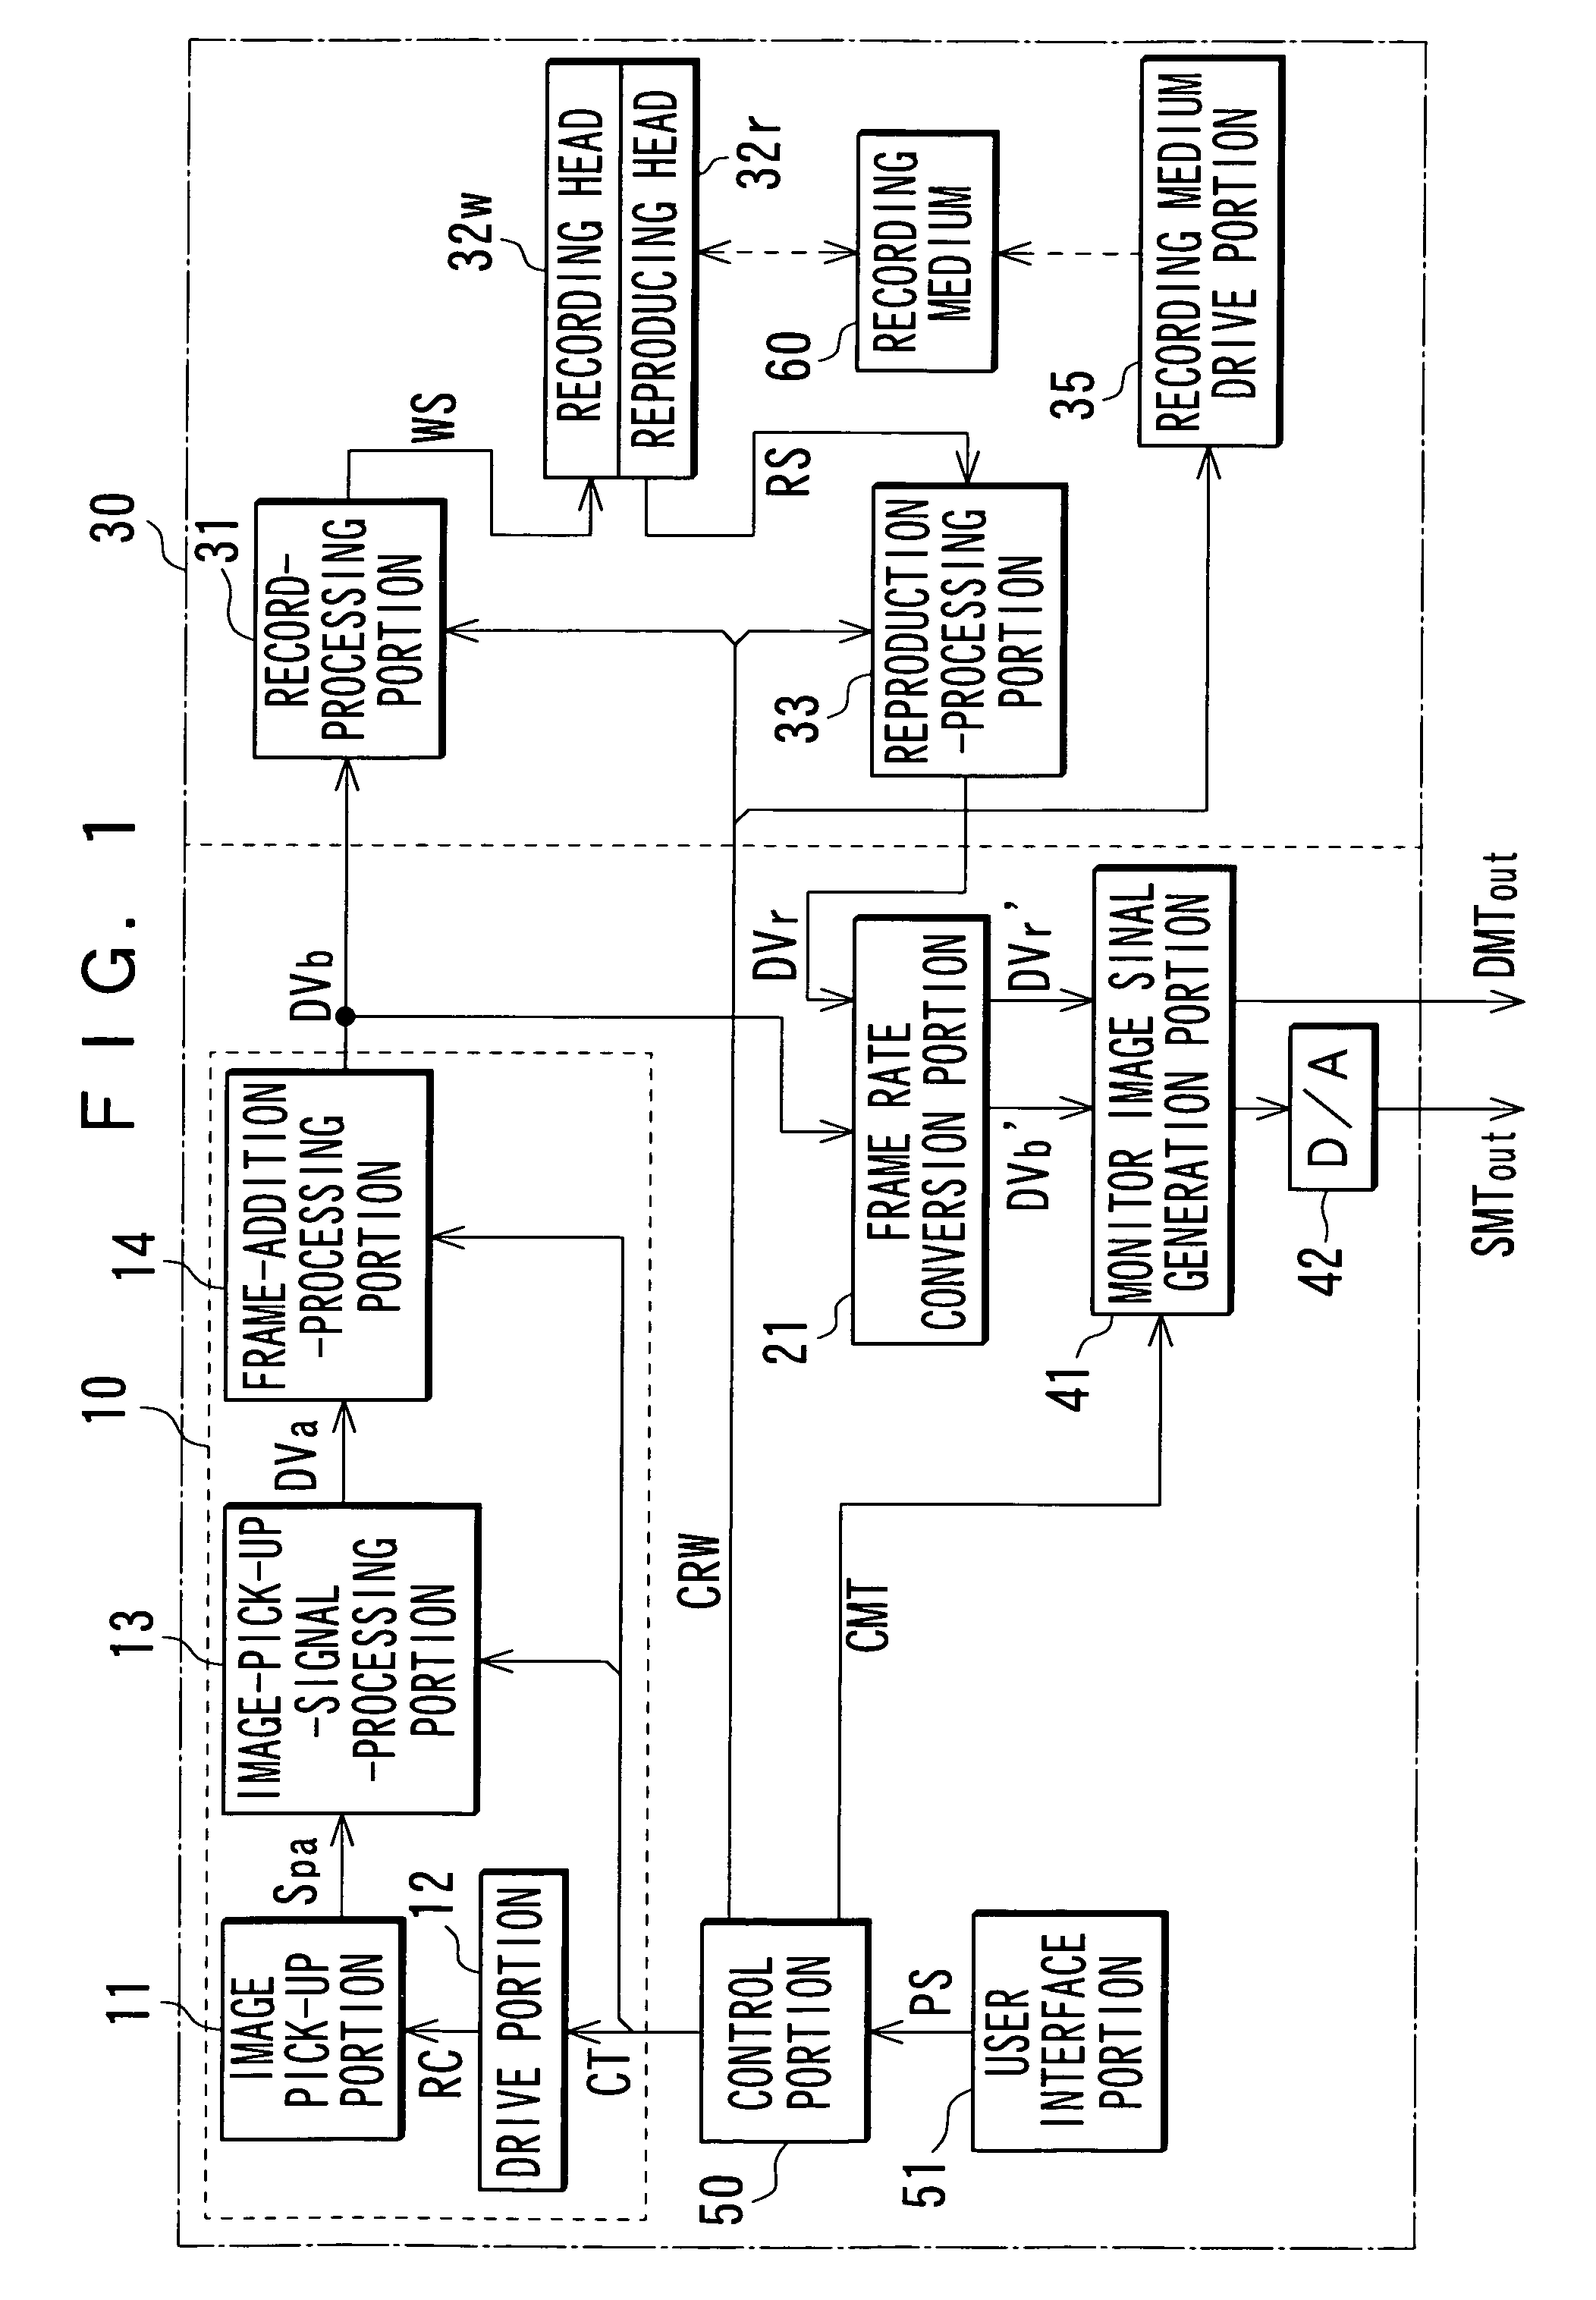 Image pick-up device using an image signal of a variable frame-rate